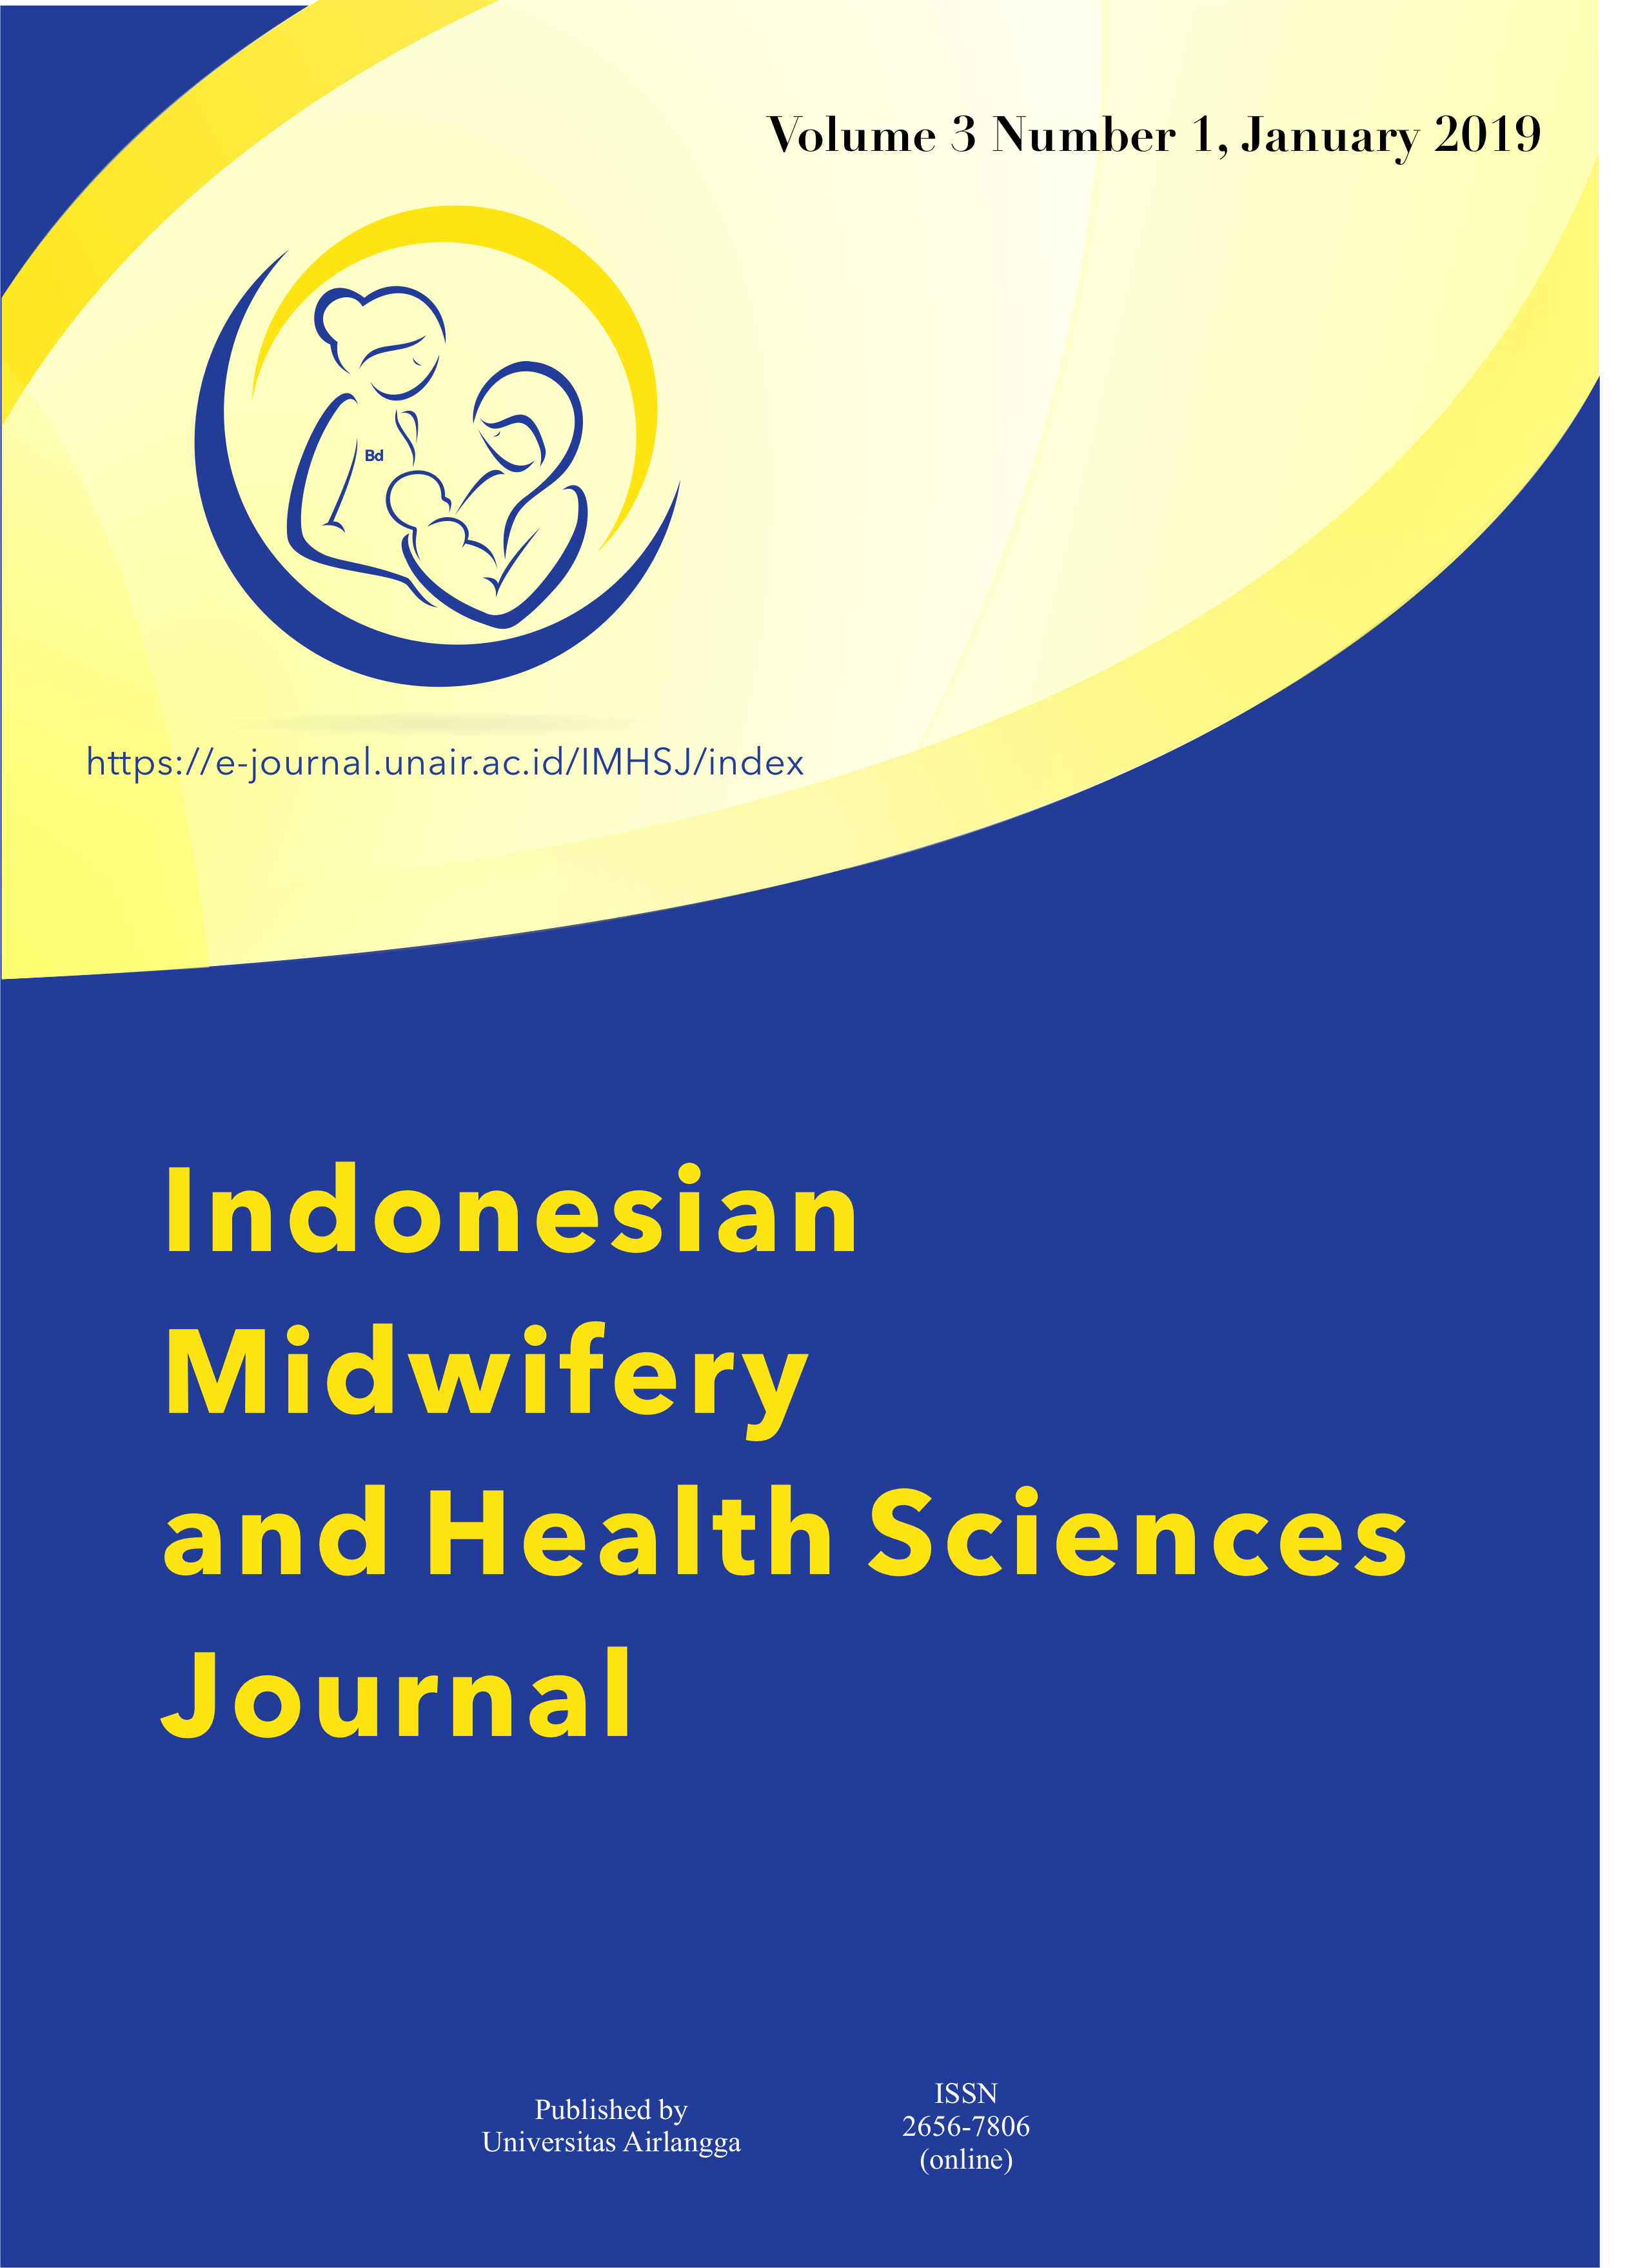 						View Vol. 3 No. 1 (2019): Indonesian Midwifery and Health Sciences Journal, January 2019
					